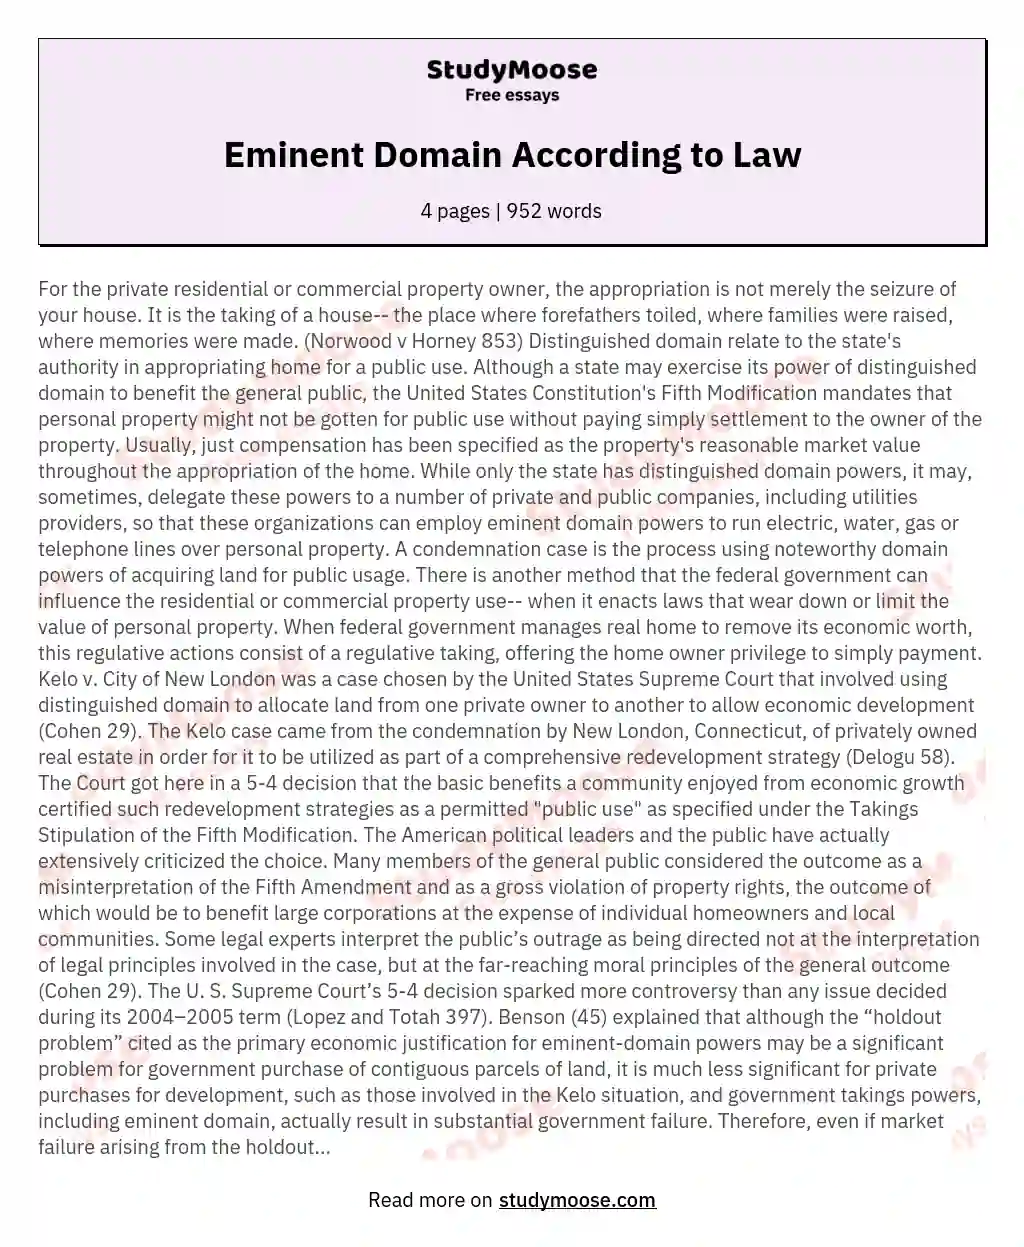 Eminent Domain According to Law essay